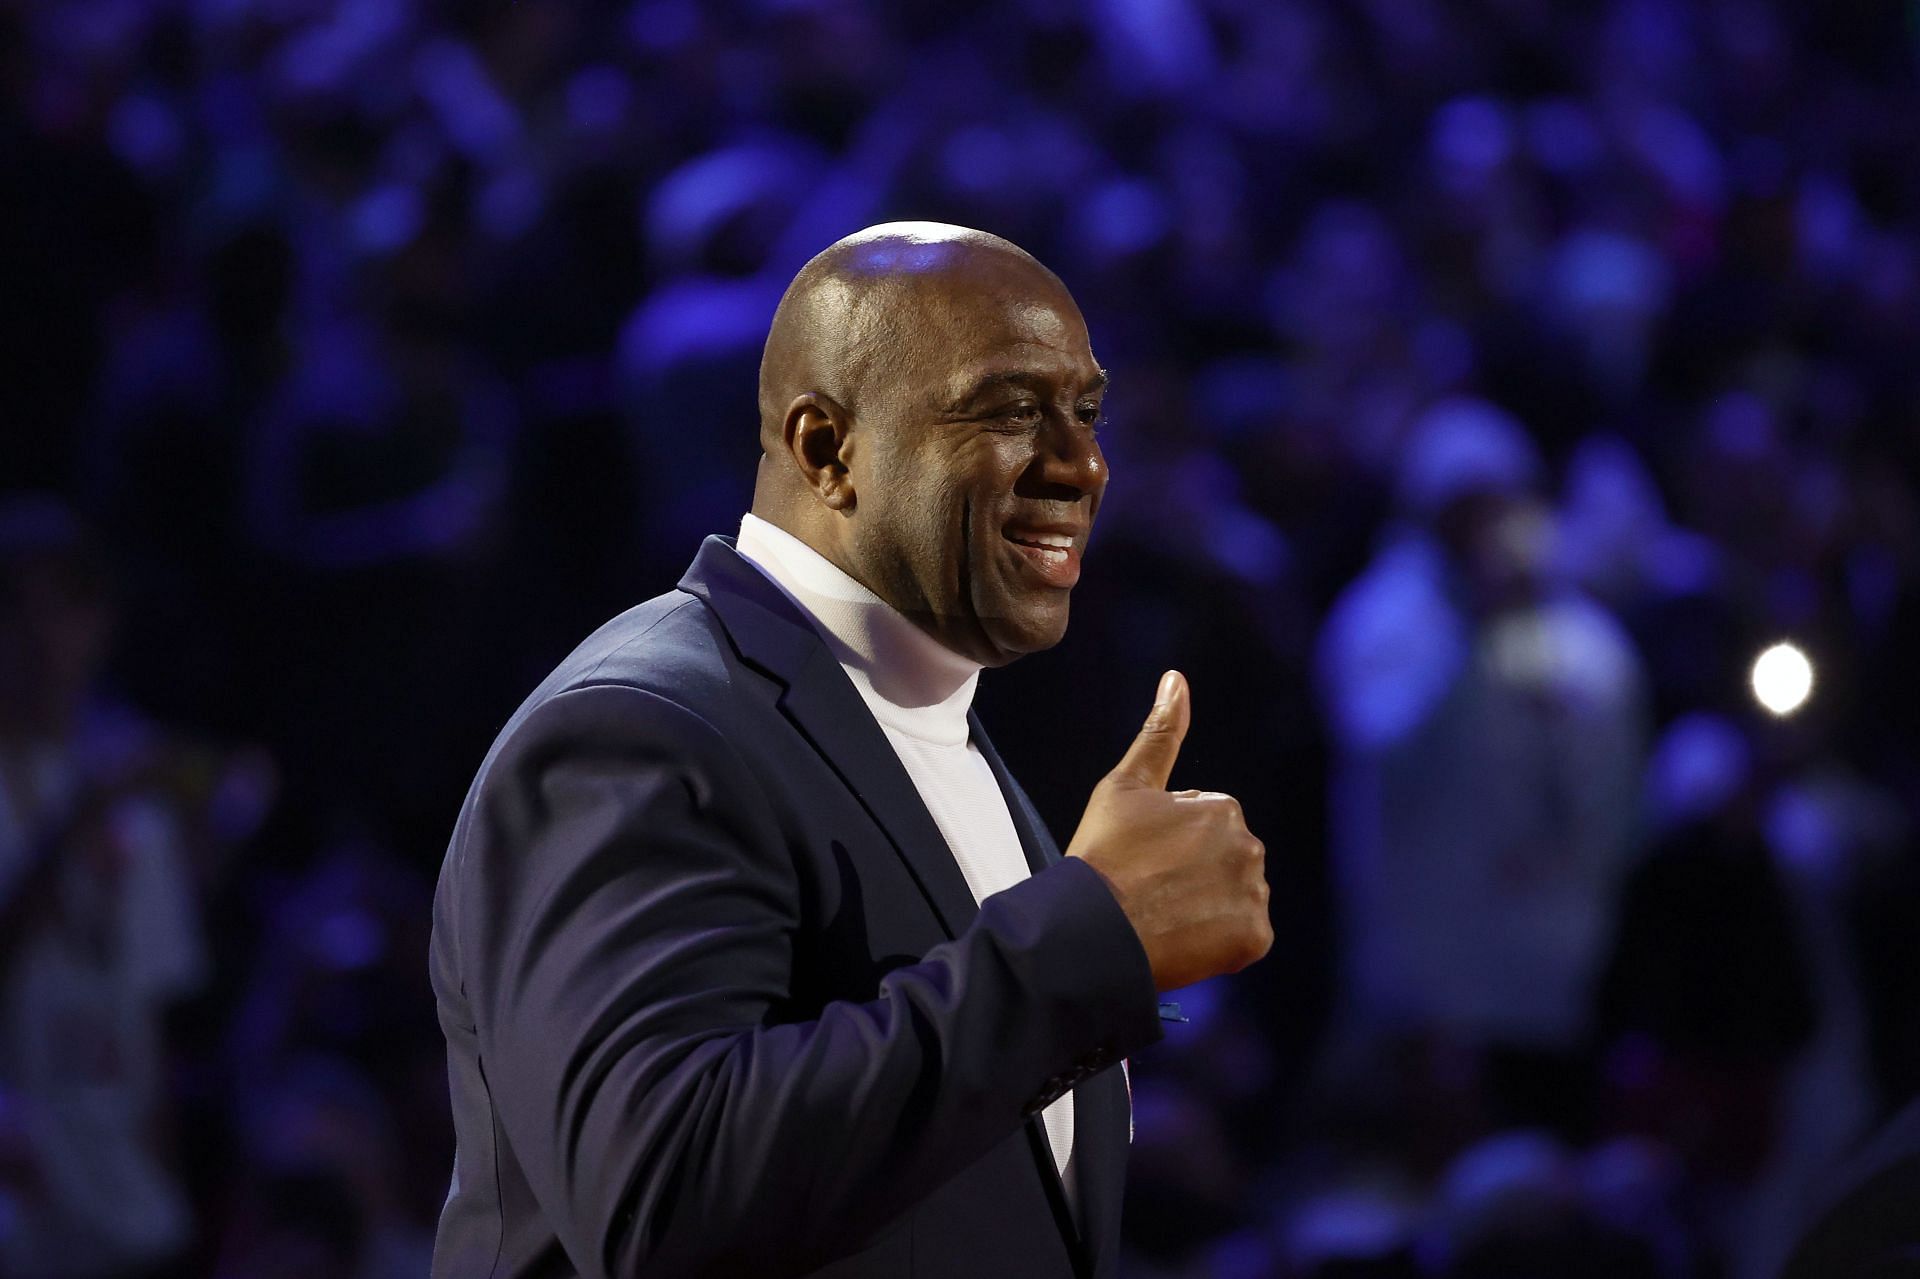 Magic Johnson comes clean about blood donation rumors on social media